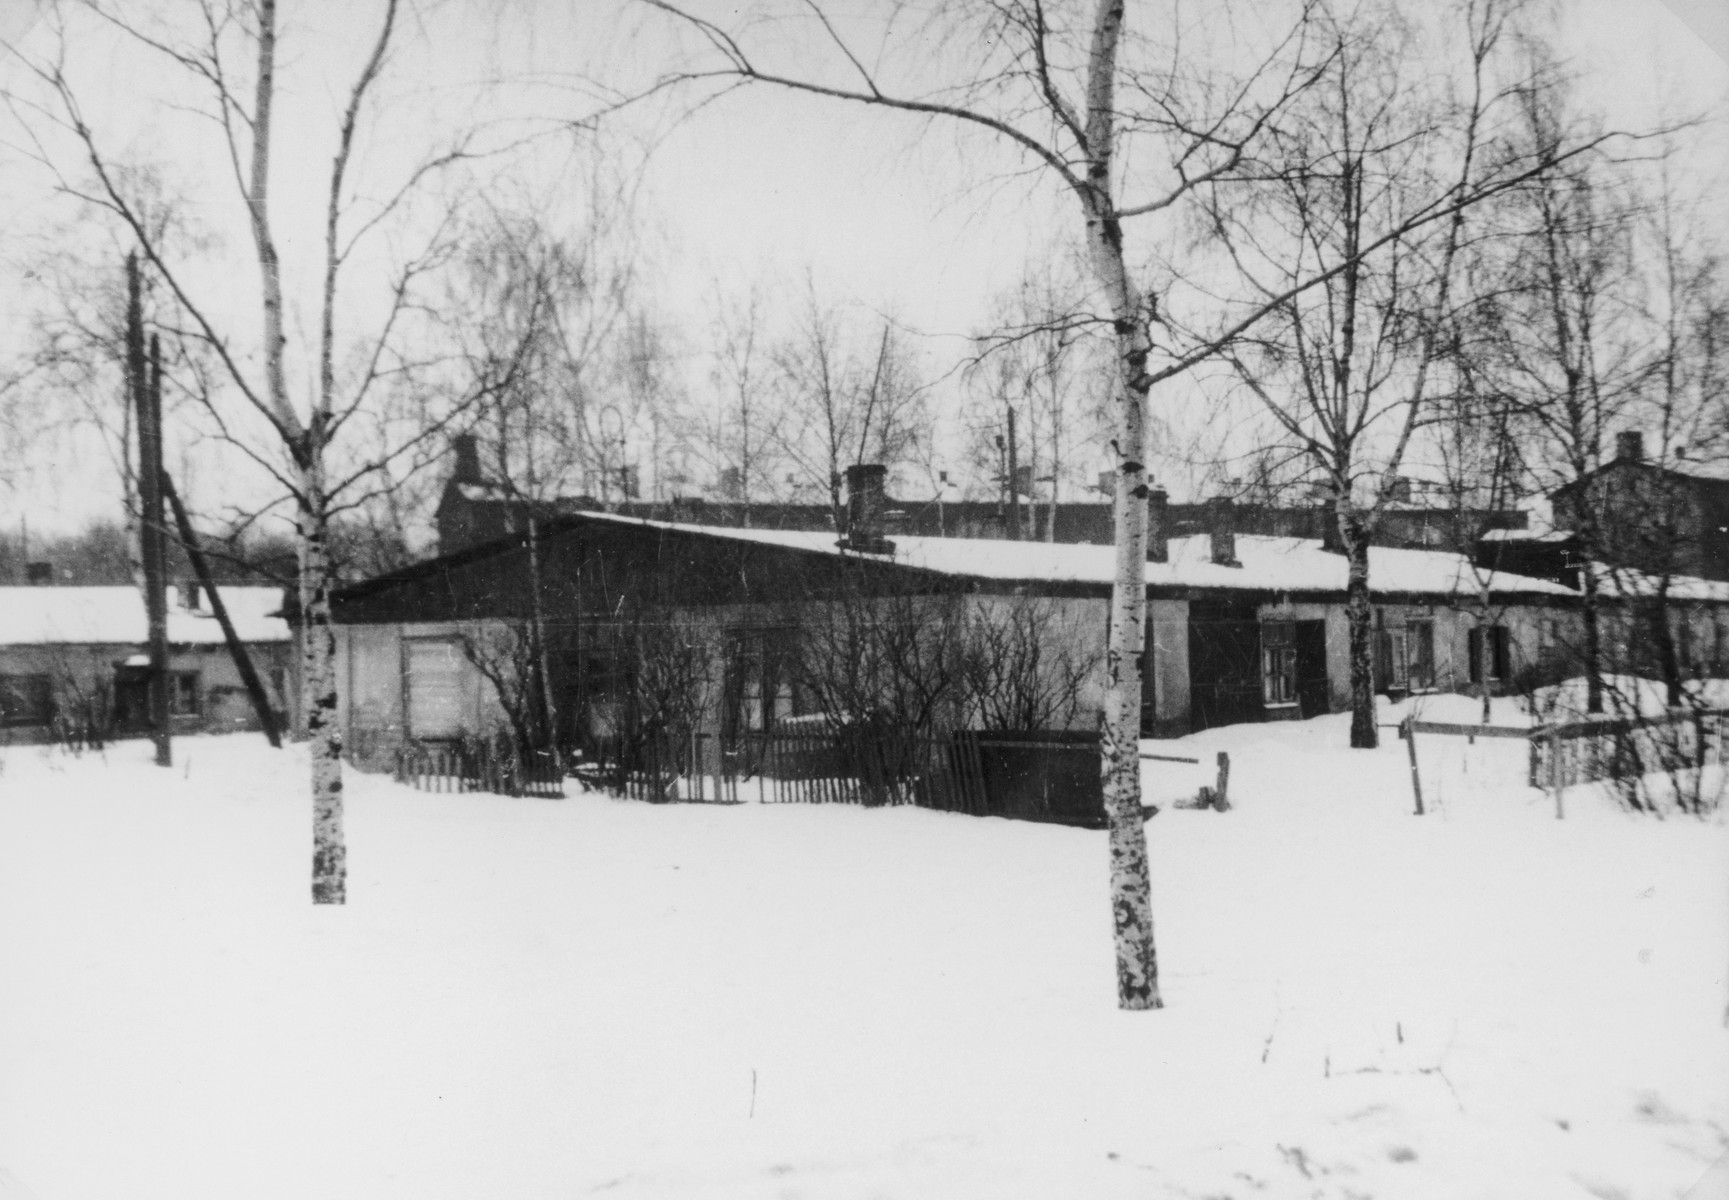 View of the former Kaiserwald concentration camp.